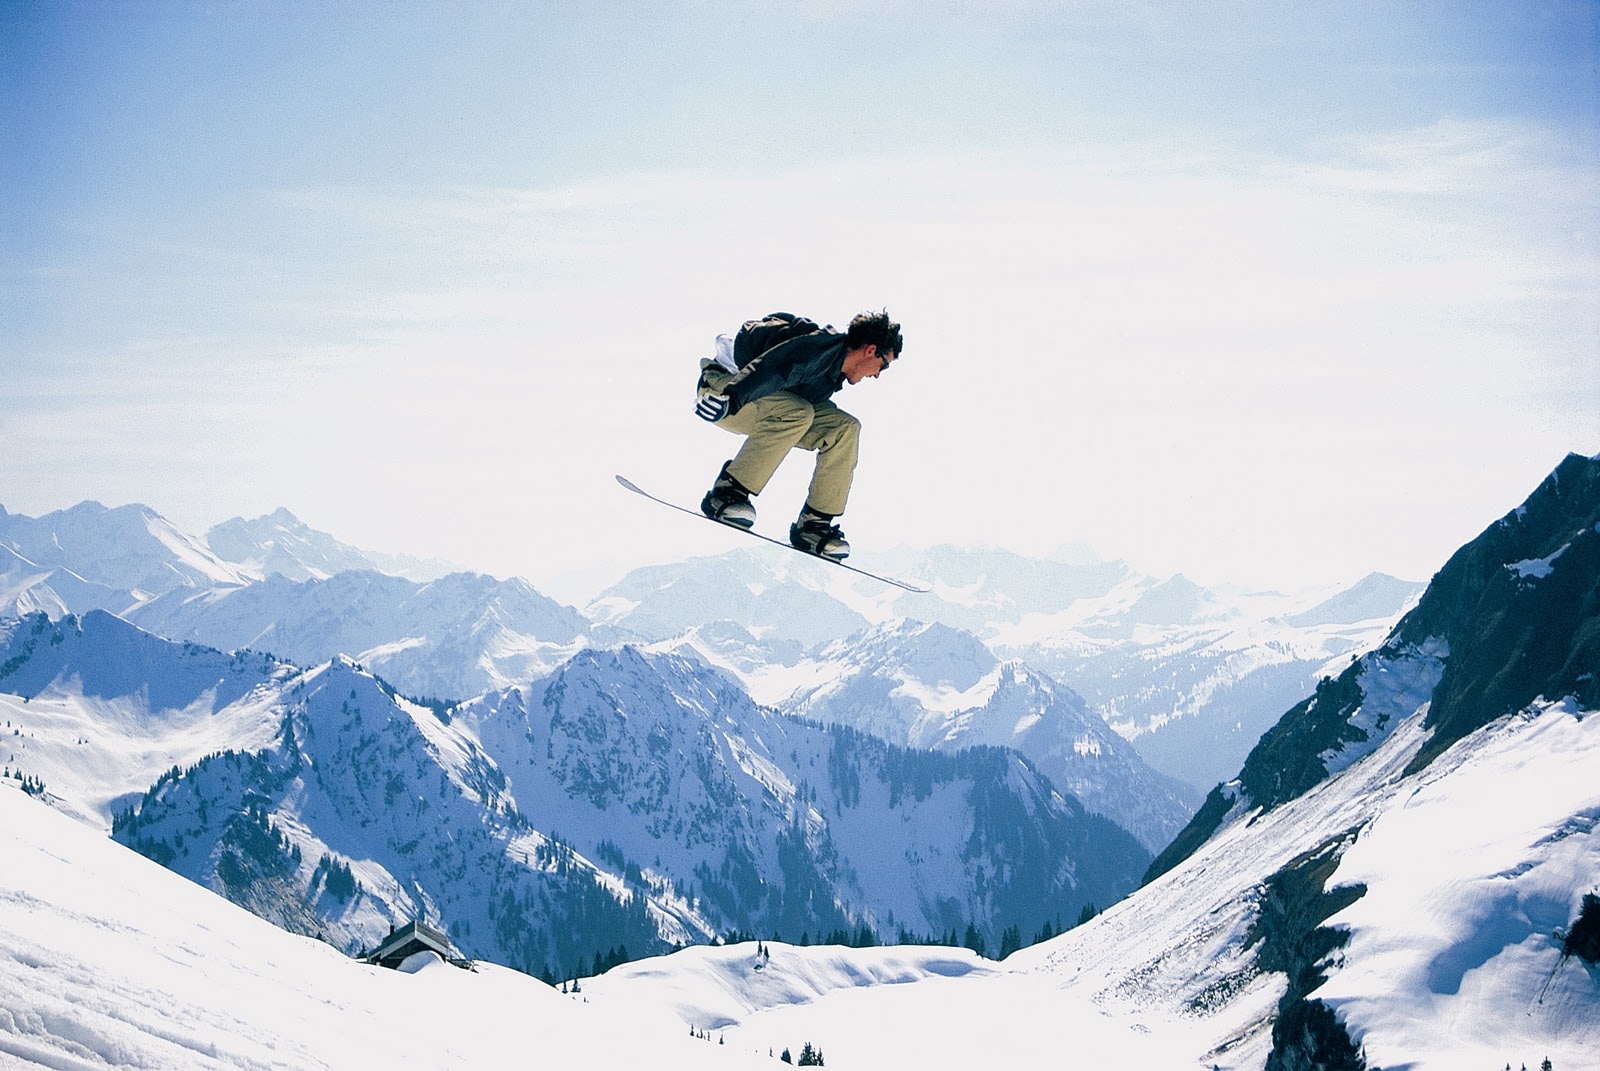 Snowboarding Wallpapers Snowboarding Days   Snowboard Pictures